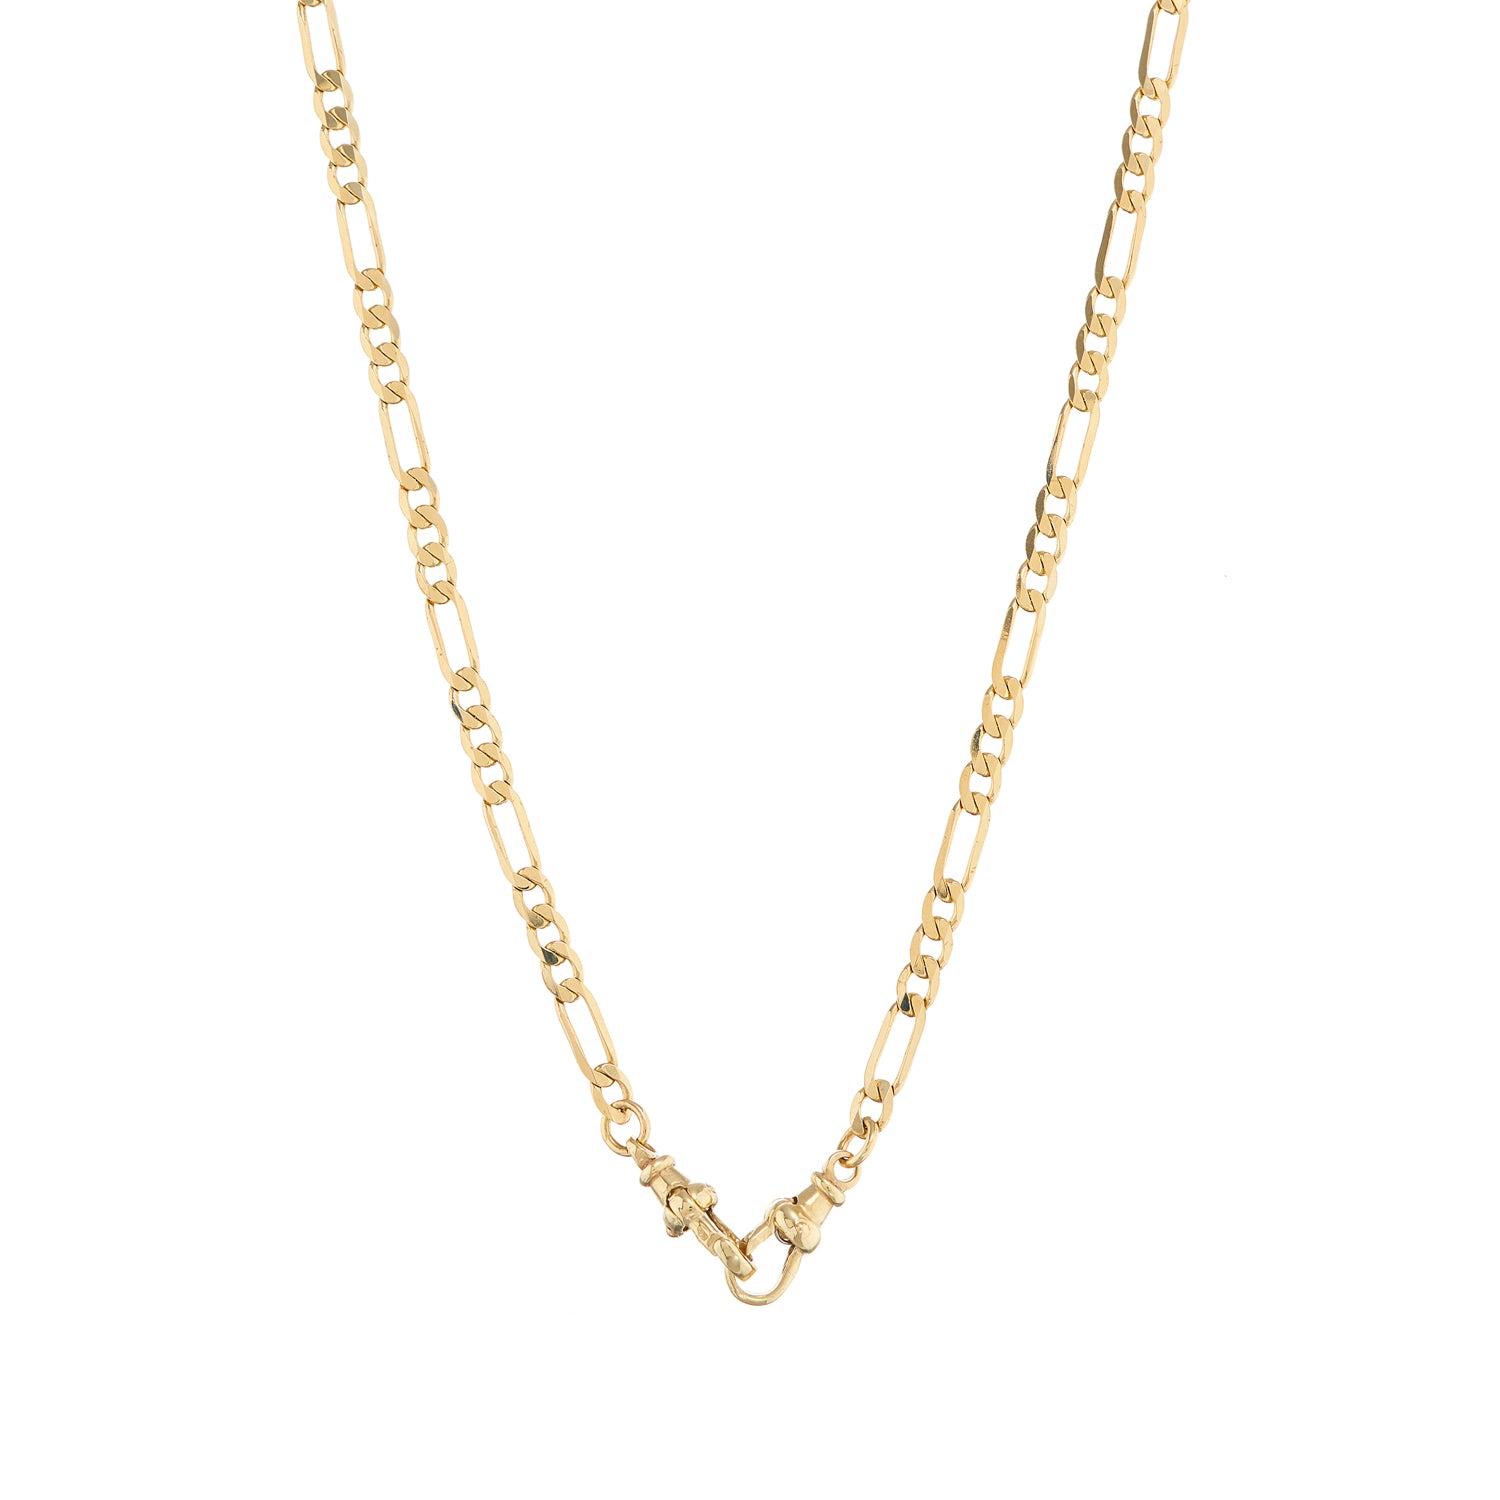 London Flats Chain Necklace